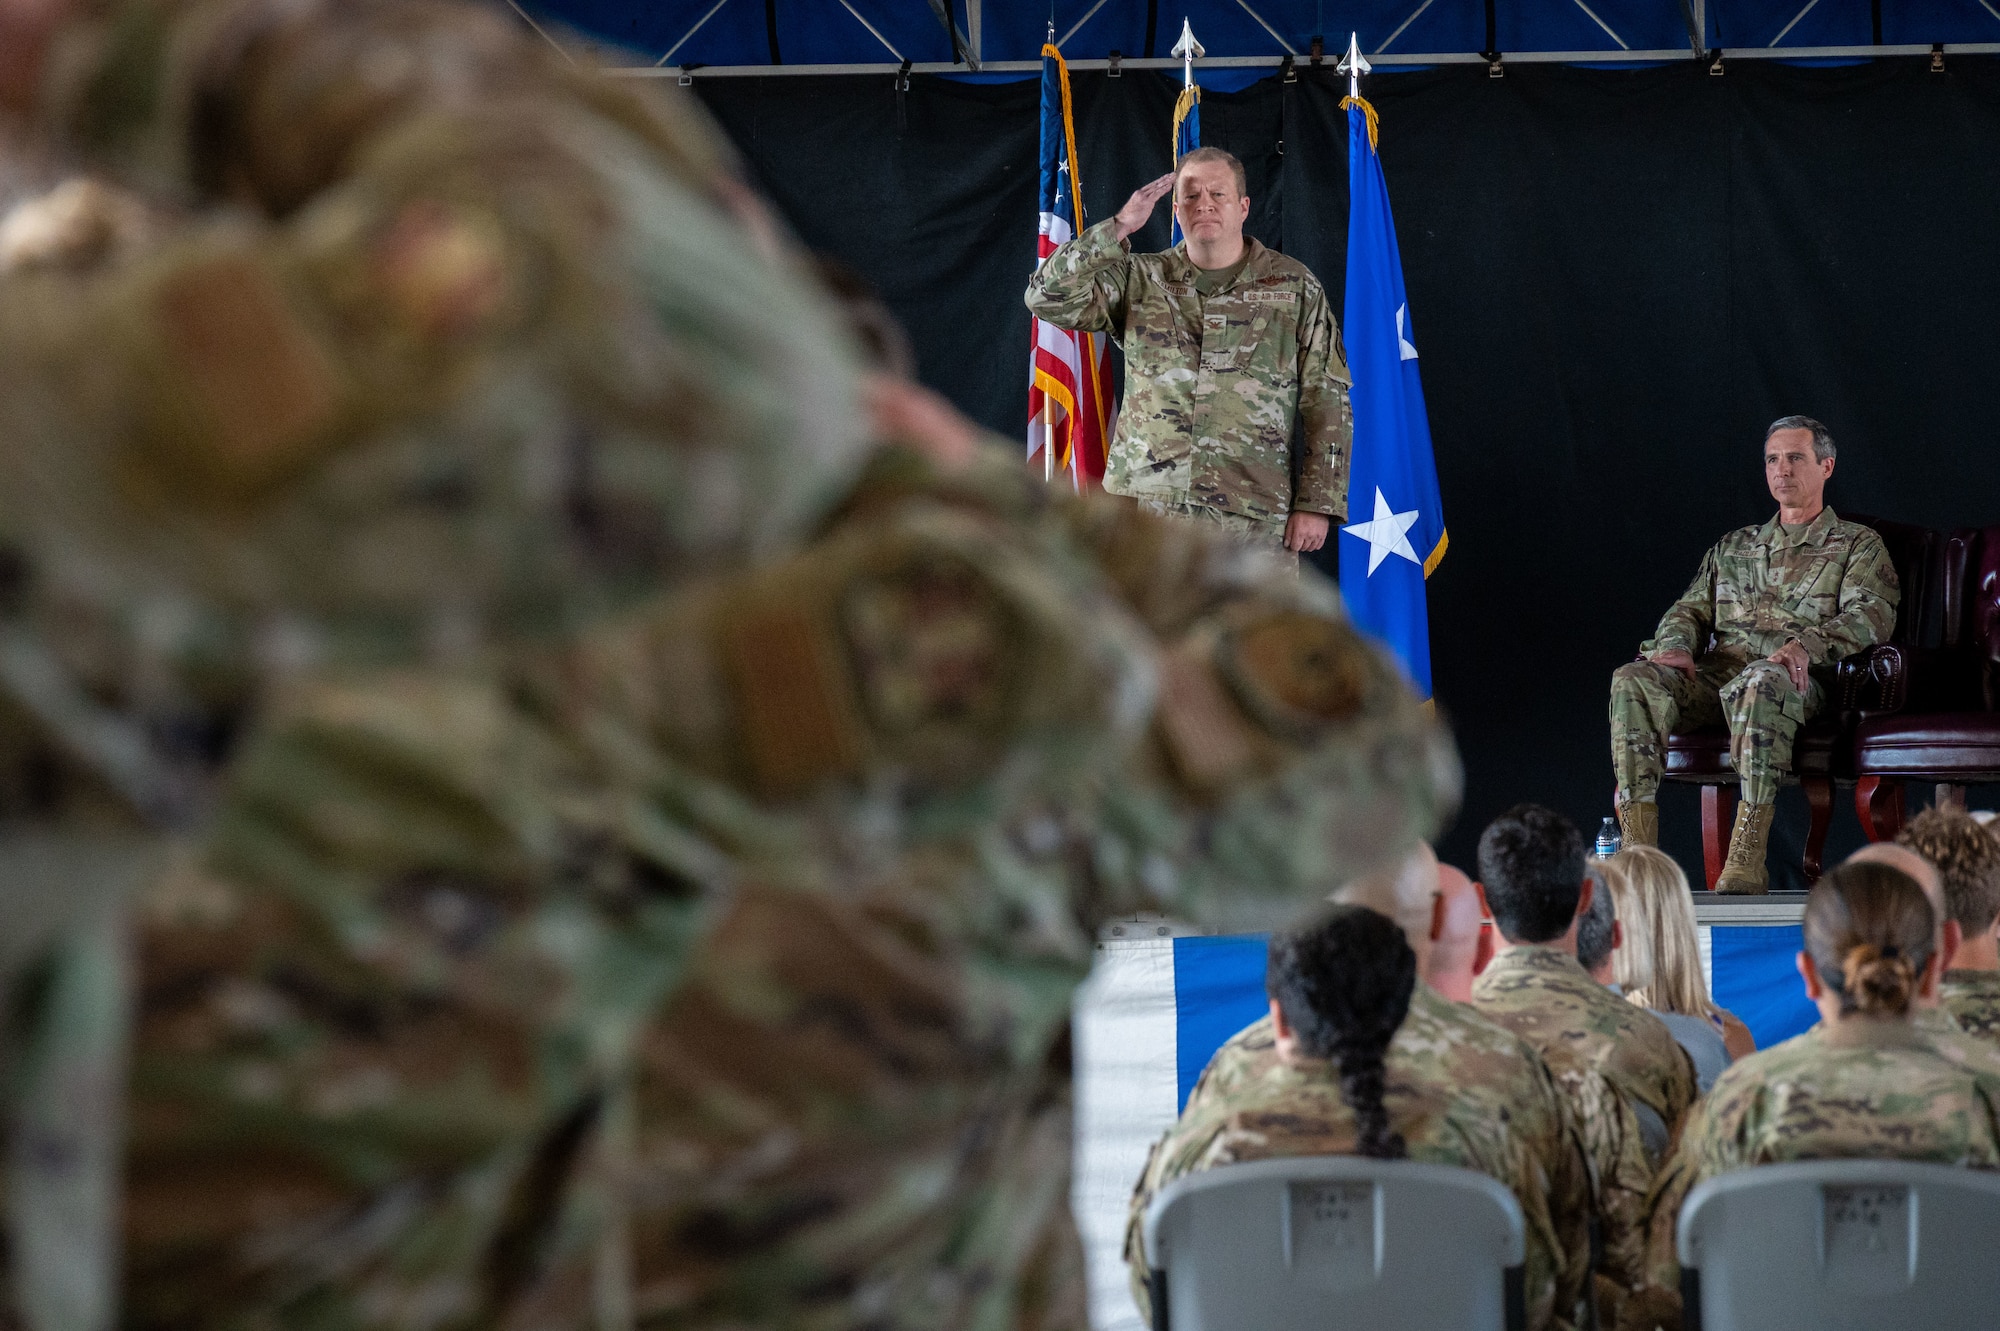 Col. Jesse Hamilton, 920th Rescue Wing commander, renders his first salute to 920th RQW Airmen during a change of command ceremony, Sept. 11, 2022 at Patrick Space Force Base, Florida. The change of command is a military tradition that formally signifies the transfer of responsibility and authority from one commanding officer to another; symbolized through the passing of a guidon.(U.S. Air Force photo by Master Sgt. Kelly Goonan)